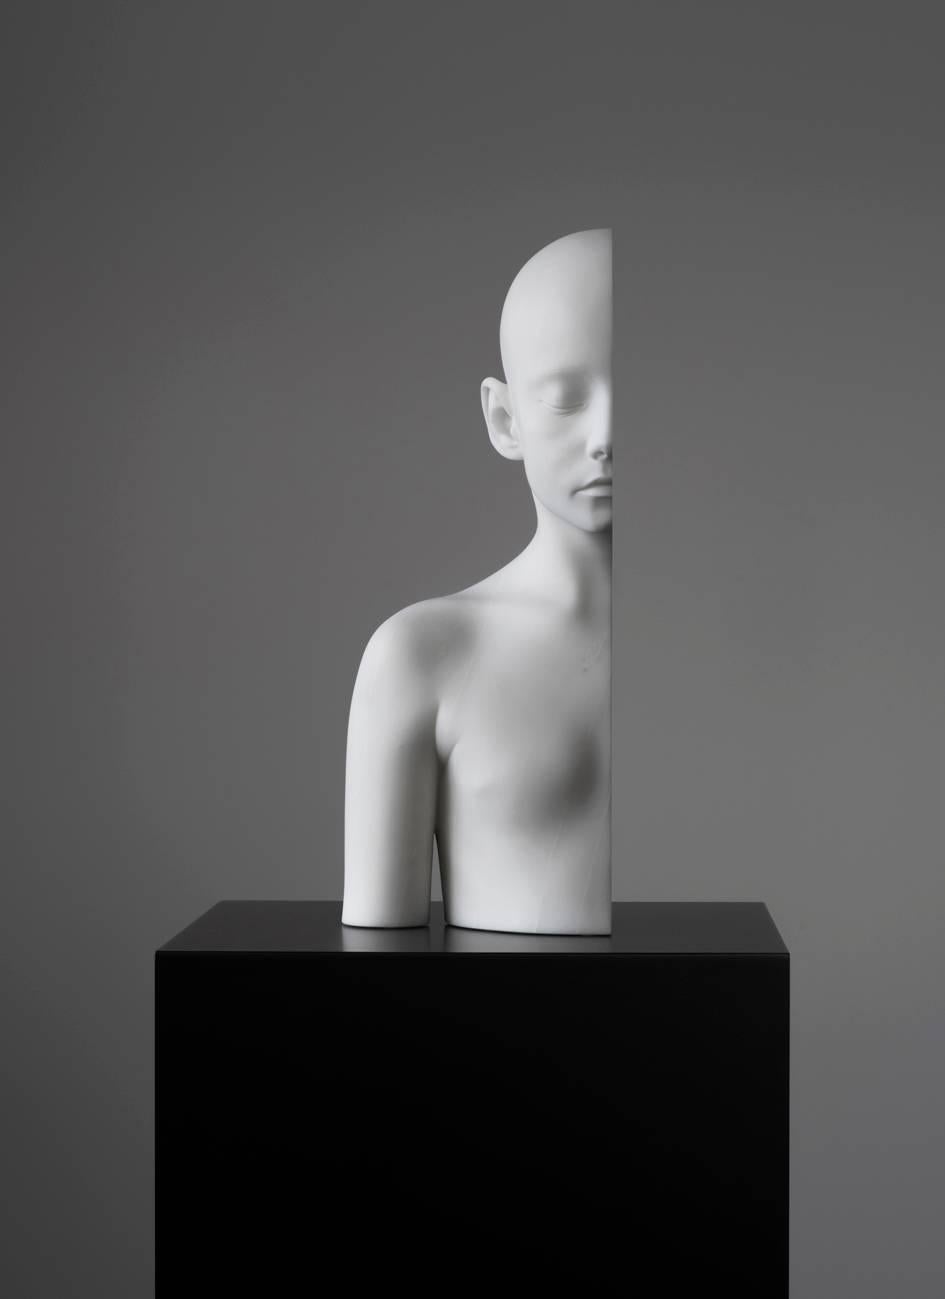 Edition of 3+2 AP
Anders Krisár
Half Girl (right), 2018
Marble
47 x 23 x 18.2 cm
Edition of 3 +2 AP

Anders Krisár’s work, often focuses on the human body. His sculptures features or makes reference to the human form, exhibiting a preoccupation with